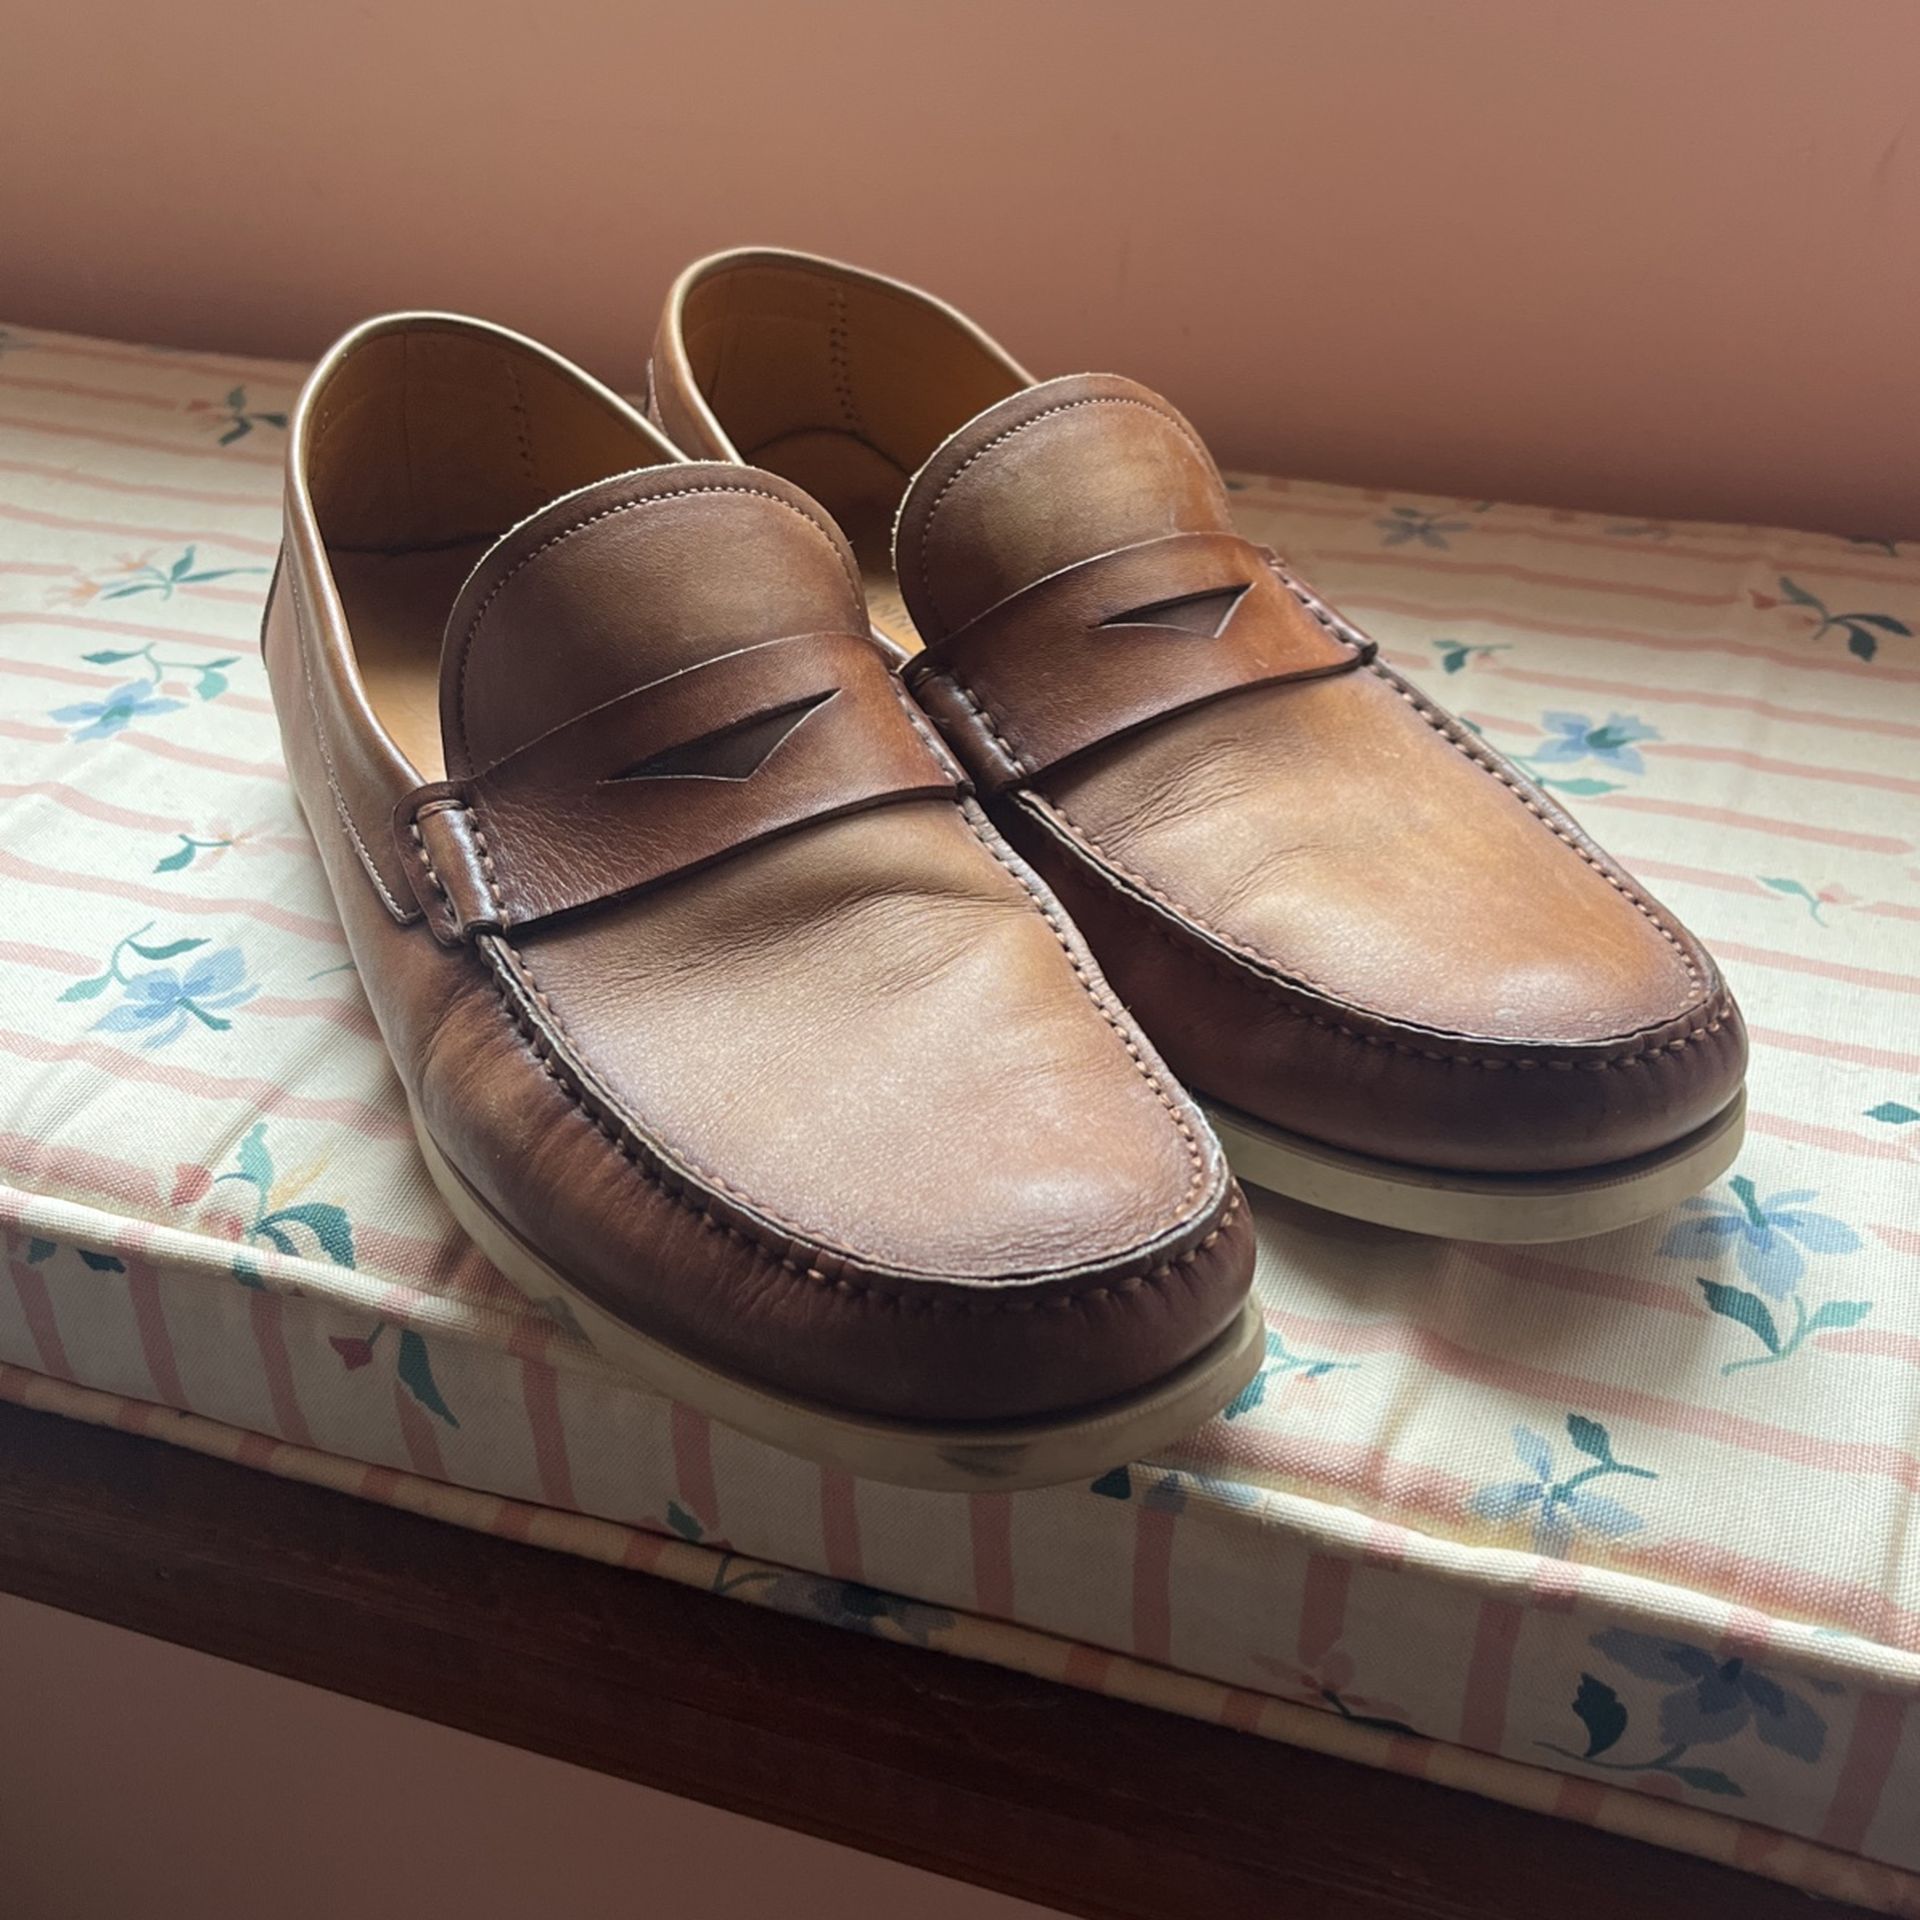 Casual Magnanni Shoes for Sale in Naples, FL - OfferUp